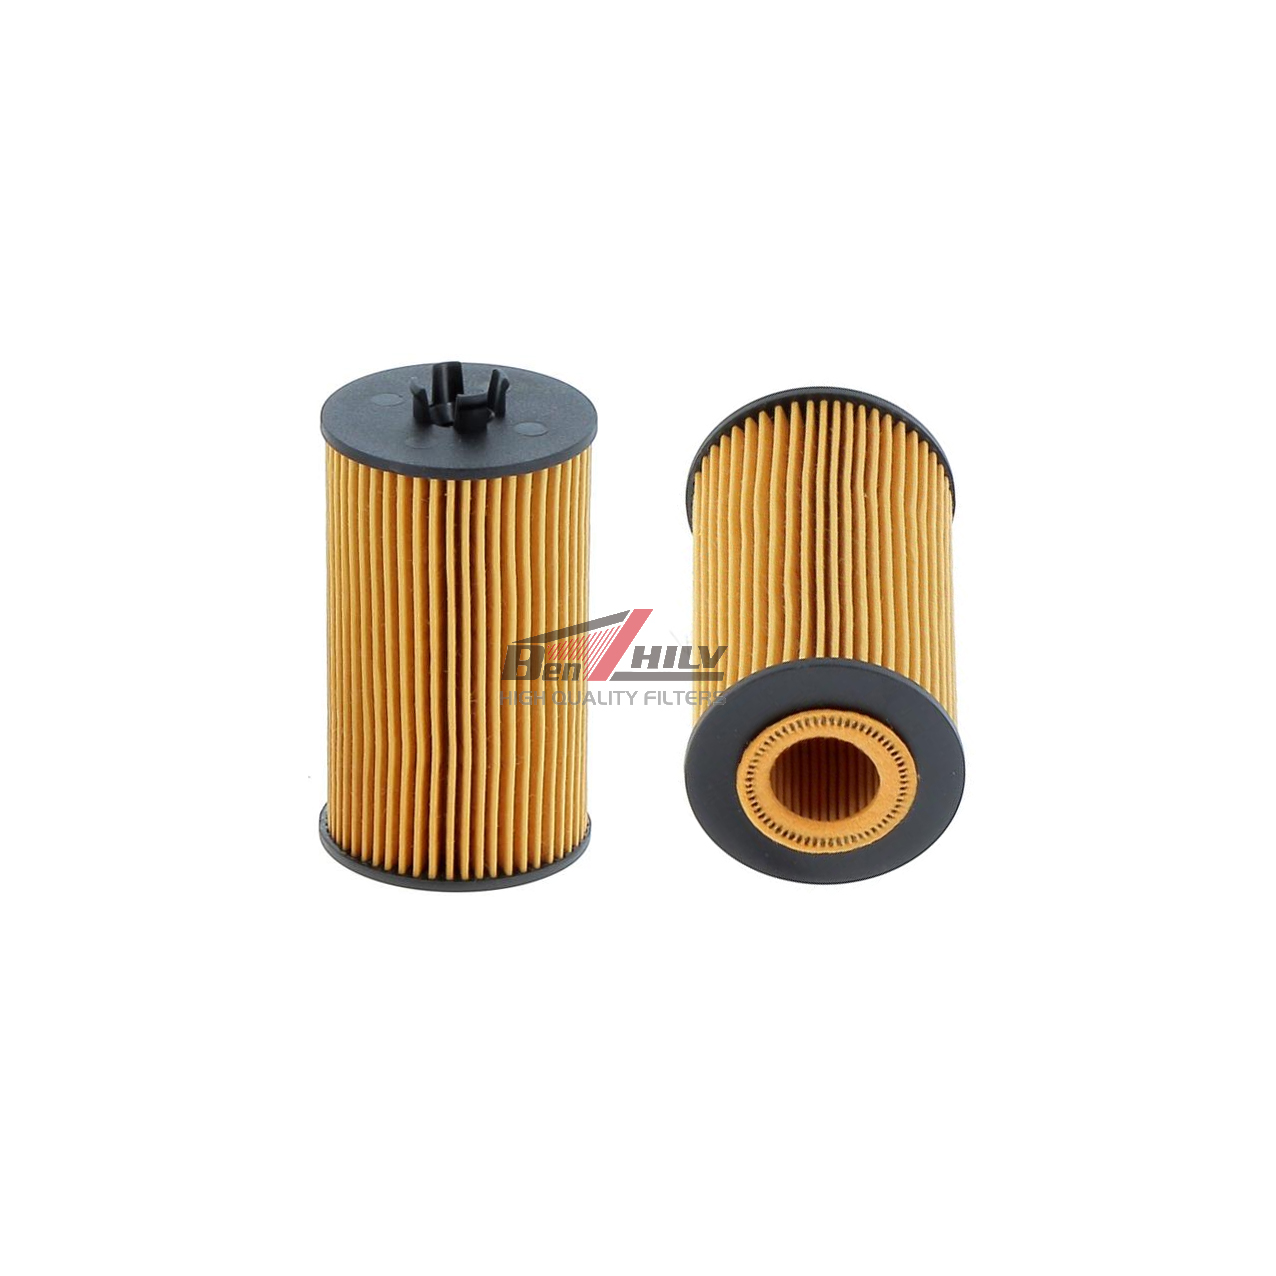 55595651 Lubricate the oil filter element